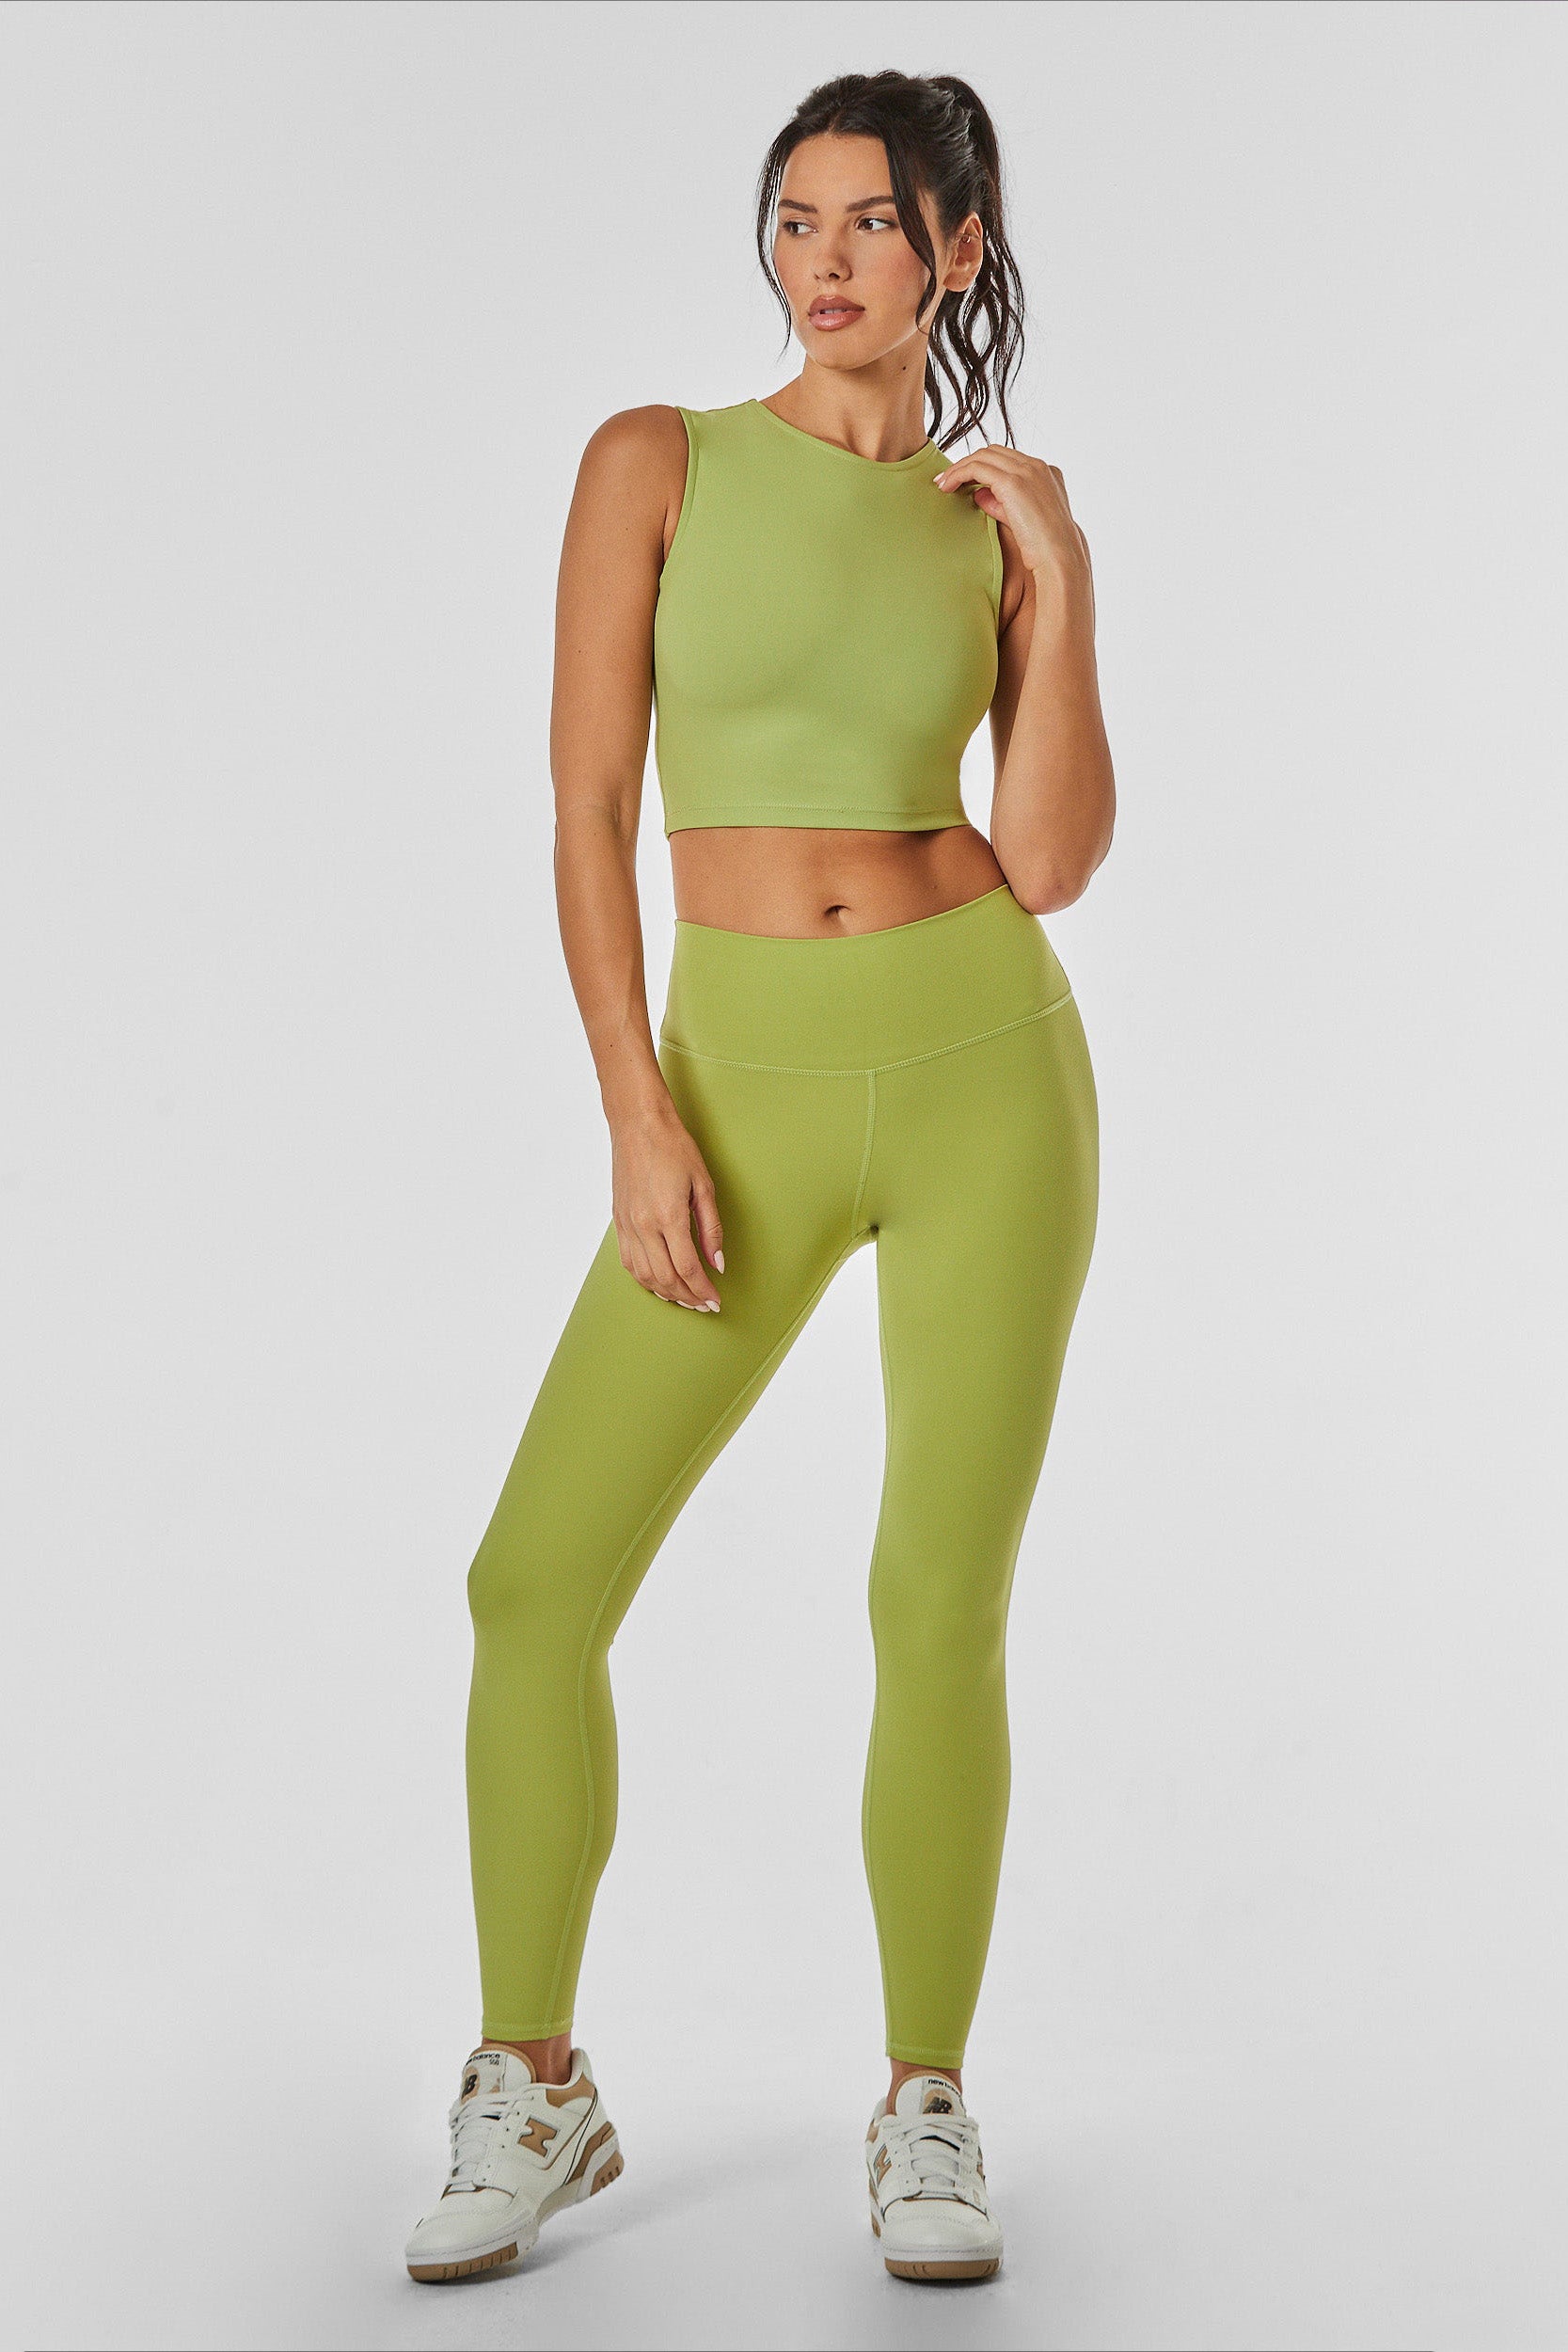 A woman stands confidently against a plain background, wearing a matching green athletic outfit consisting of a sleeveless crop top and the Limitless Legging in Matcha. She has her hair tied back in a ponytail and is wearing white and green sneakers.